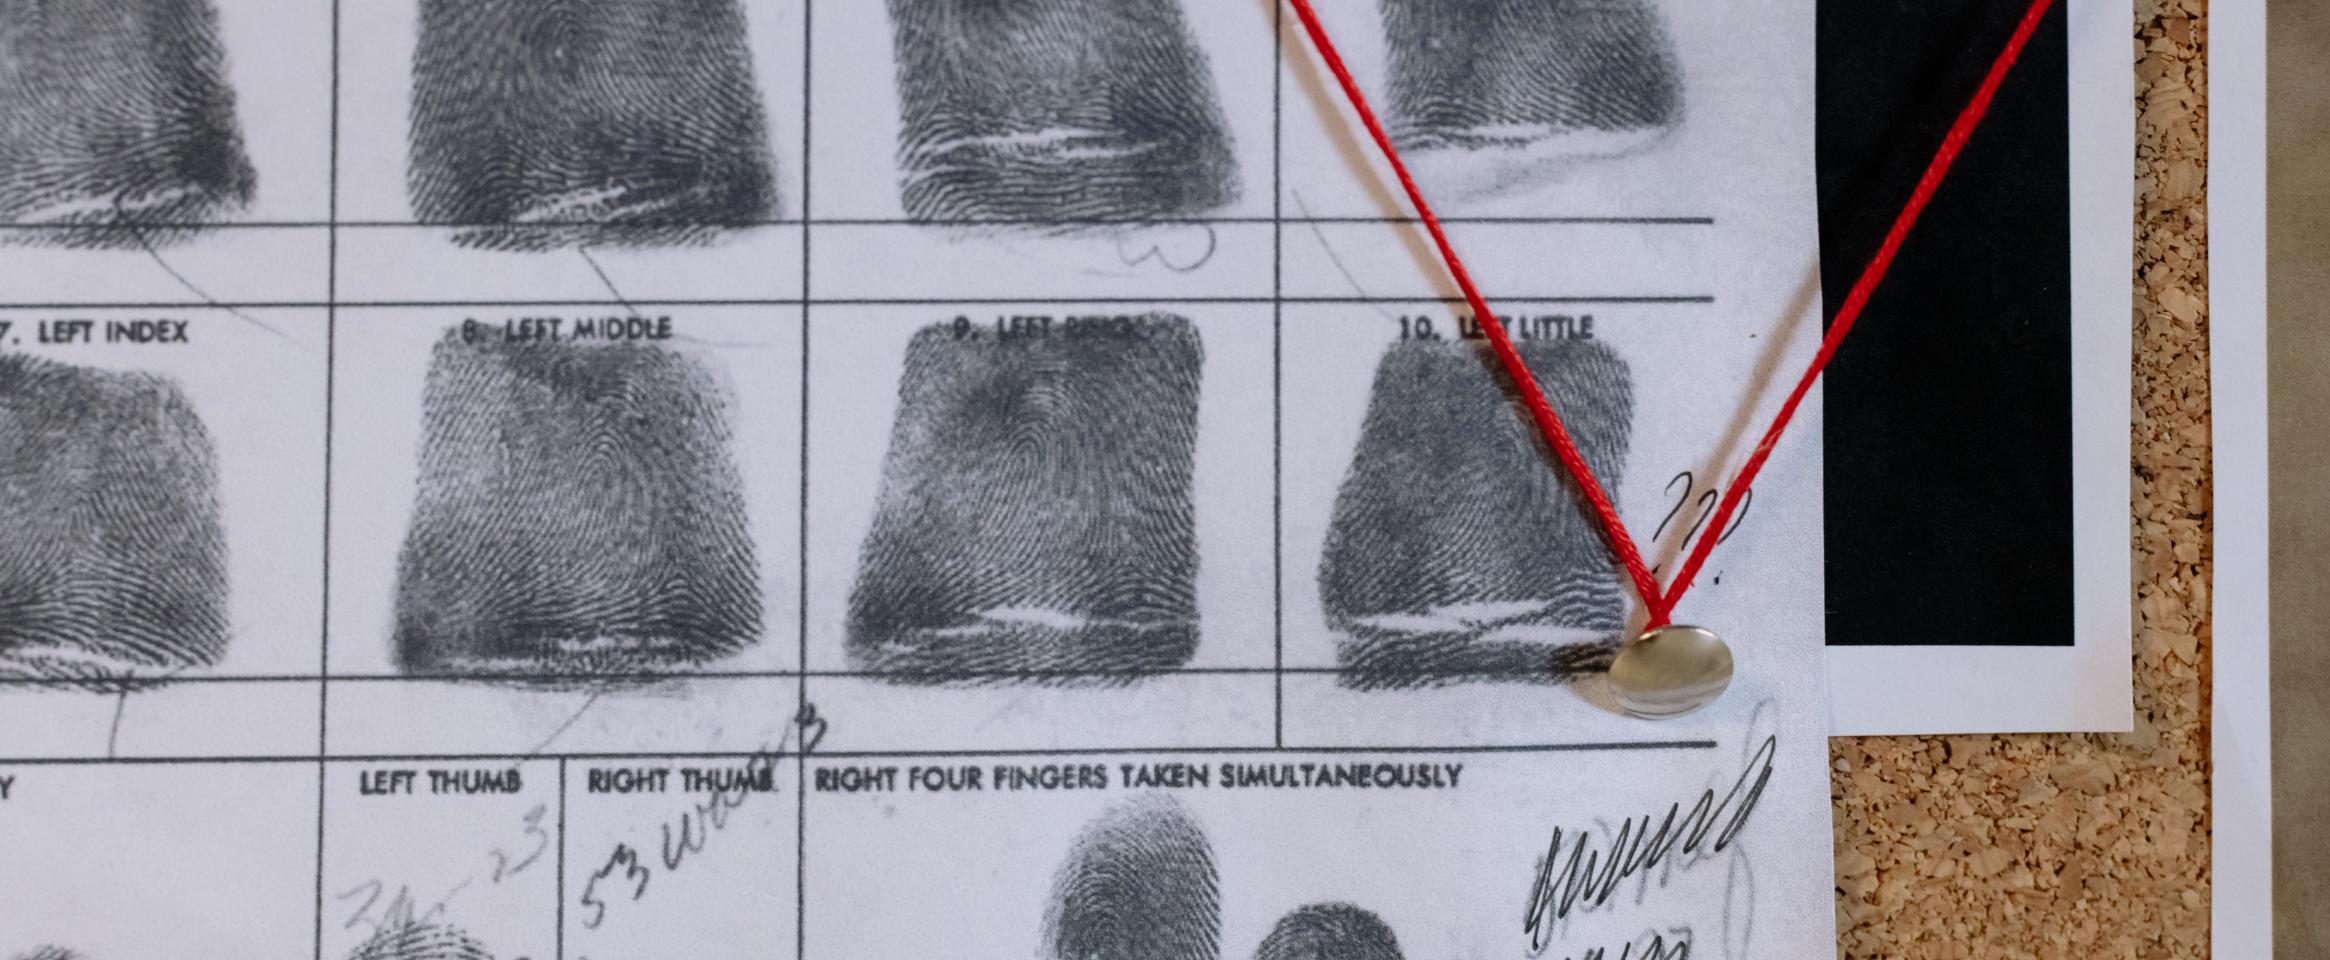 Fingerprint panels are used to match suspect prints to a crime scene, but their results aren't always clear.